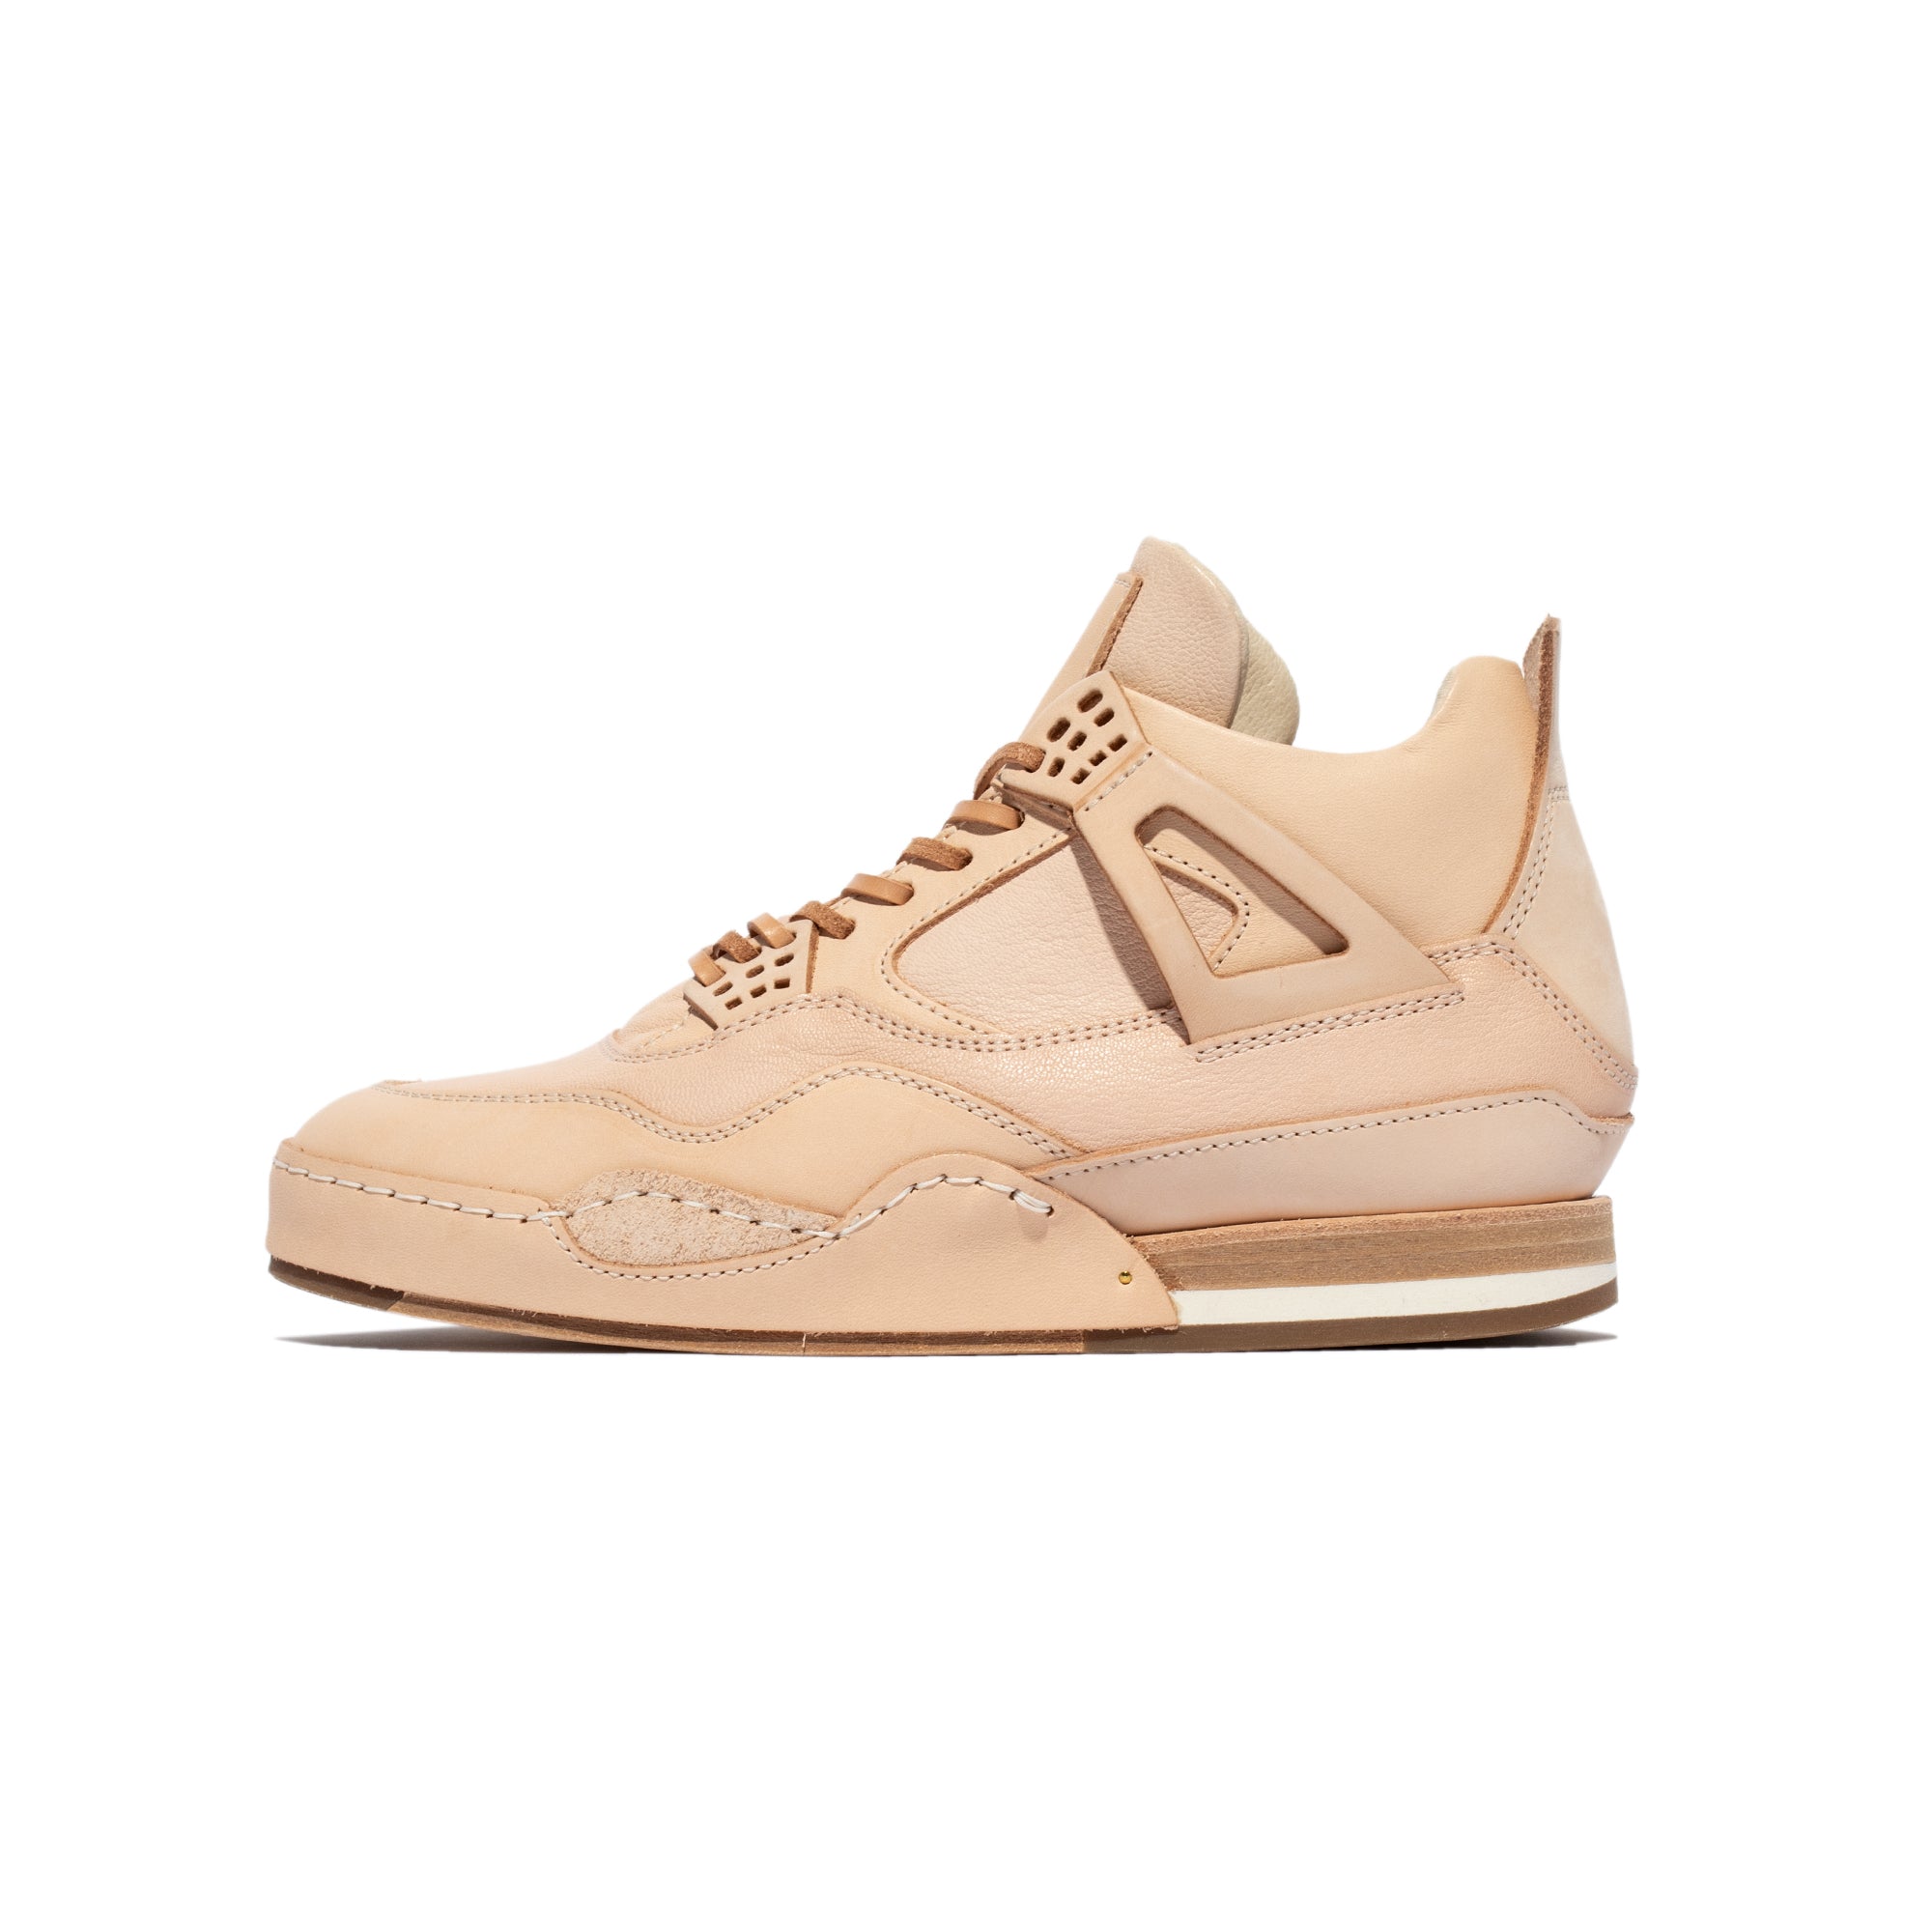 Hender Scheme Mens Manual Industrial Products 10 Shoes – Extra Butter